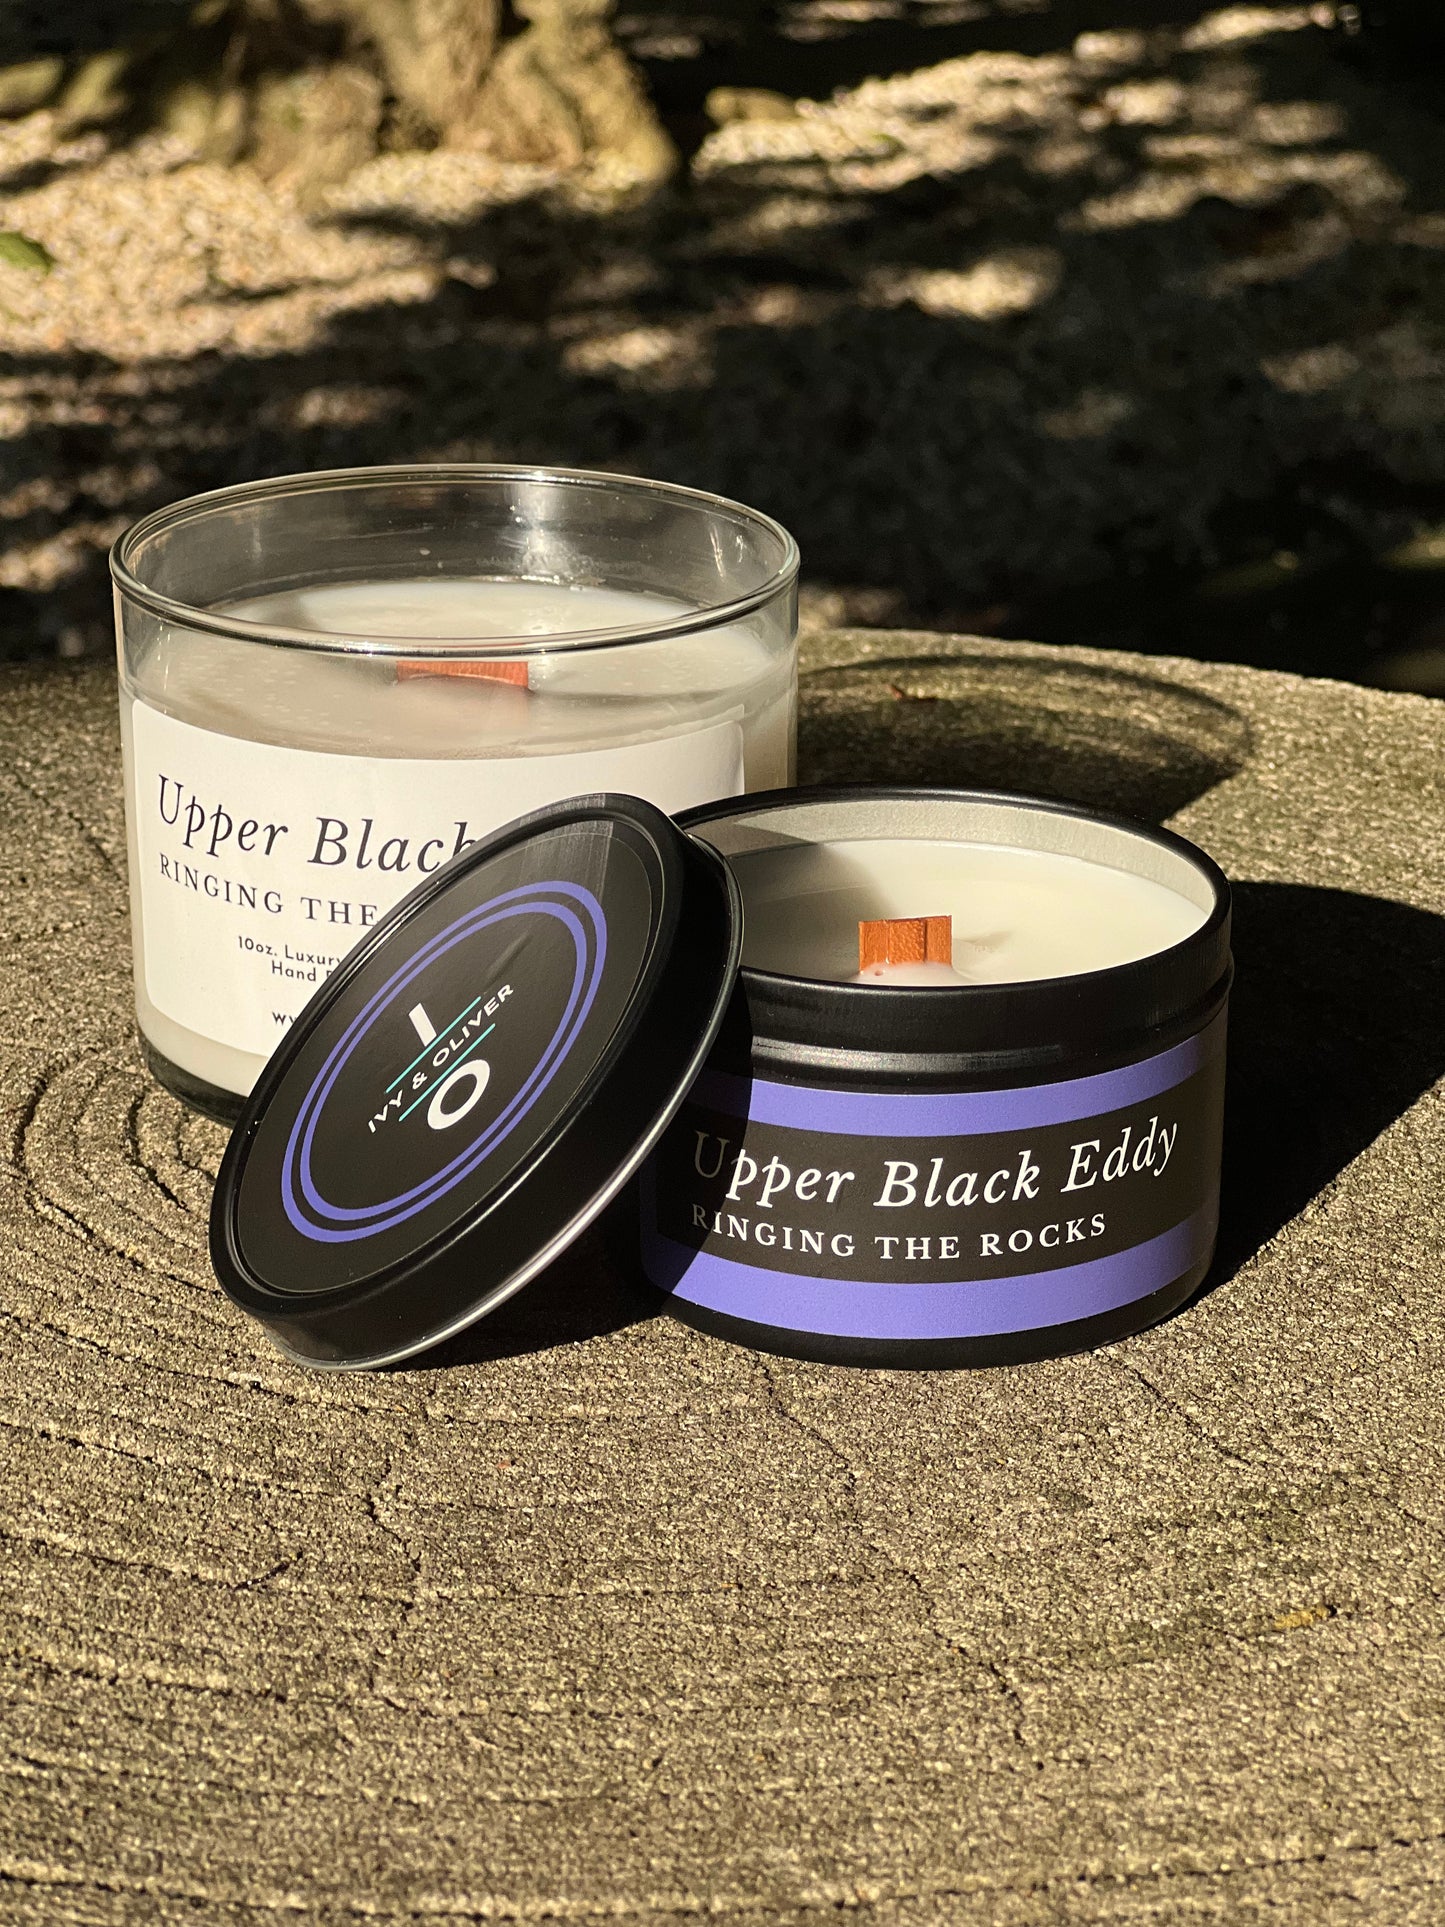 Upper Black Eddy - Ringing The Rocks - Wooden Wick Candle